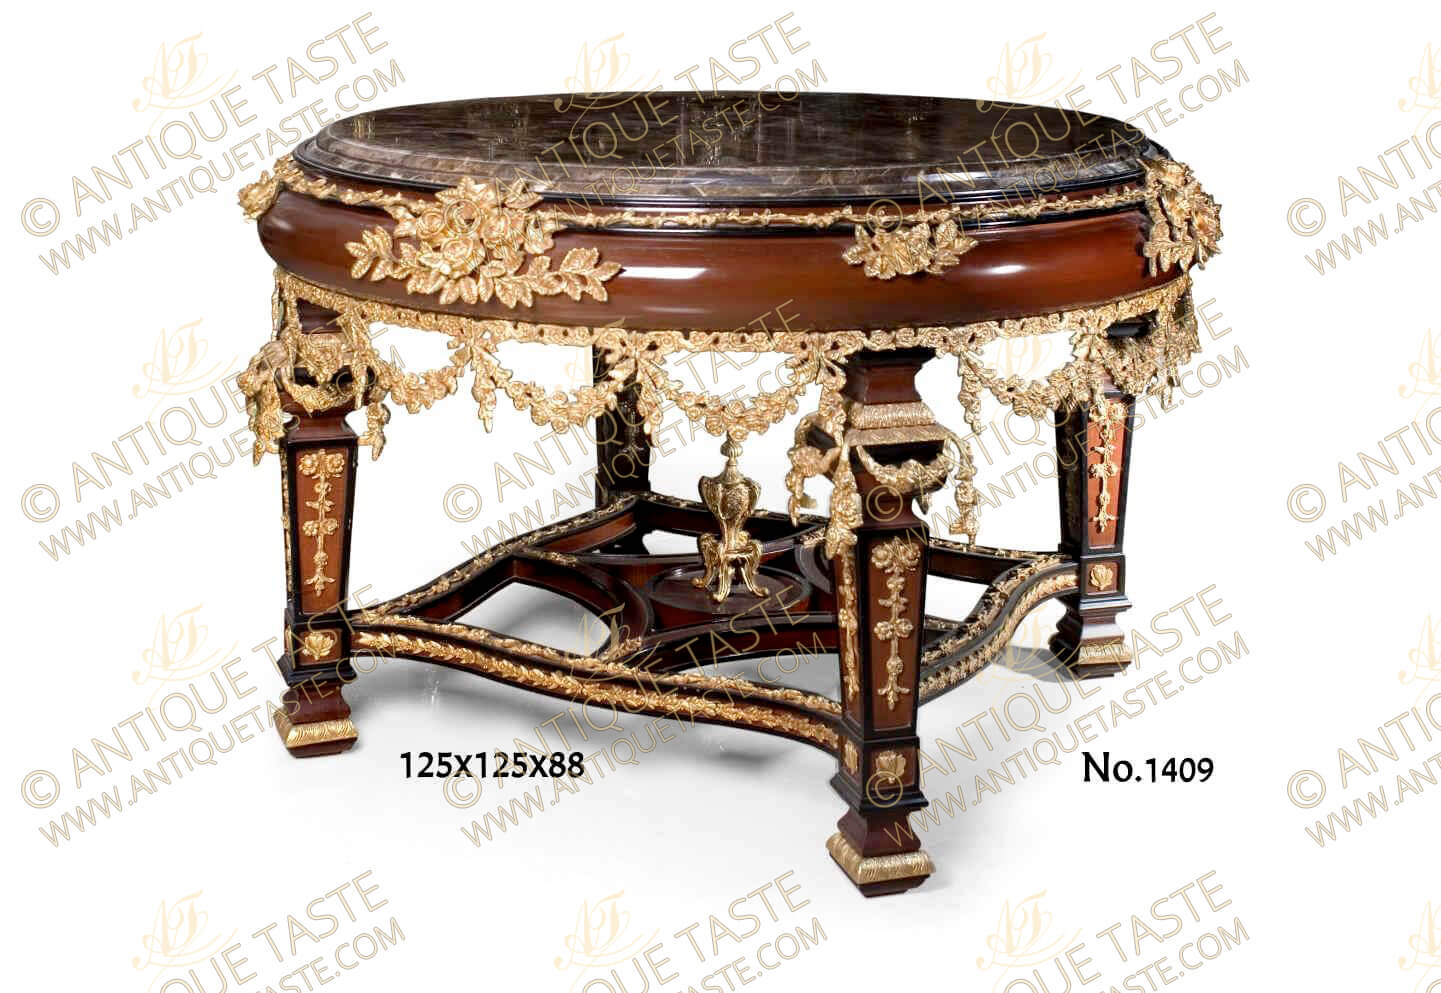 Louis XIV style gilt-ormolu-mounted mahogany finish Baroque center table, heavily ornamented with pierced works, garlands, swags, strap-works and leaf motifs, The inset beveled marble top with a convex apron ornamented with foliate ormolu filet to the top contour and gilt leafy ormolu works of blossoming flower bouquets and branches. The lower part of the apron is surrounded with an ormolu guilloche frieze of blossoming flowers with garlanded pendants, The table is raised on robust square ormolu mounted tapered legs and connected with pierced sectional curvy X stretcher garnished with ormolu leaf shaped frieze and centered with an ormolu urn of prosperity